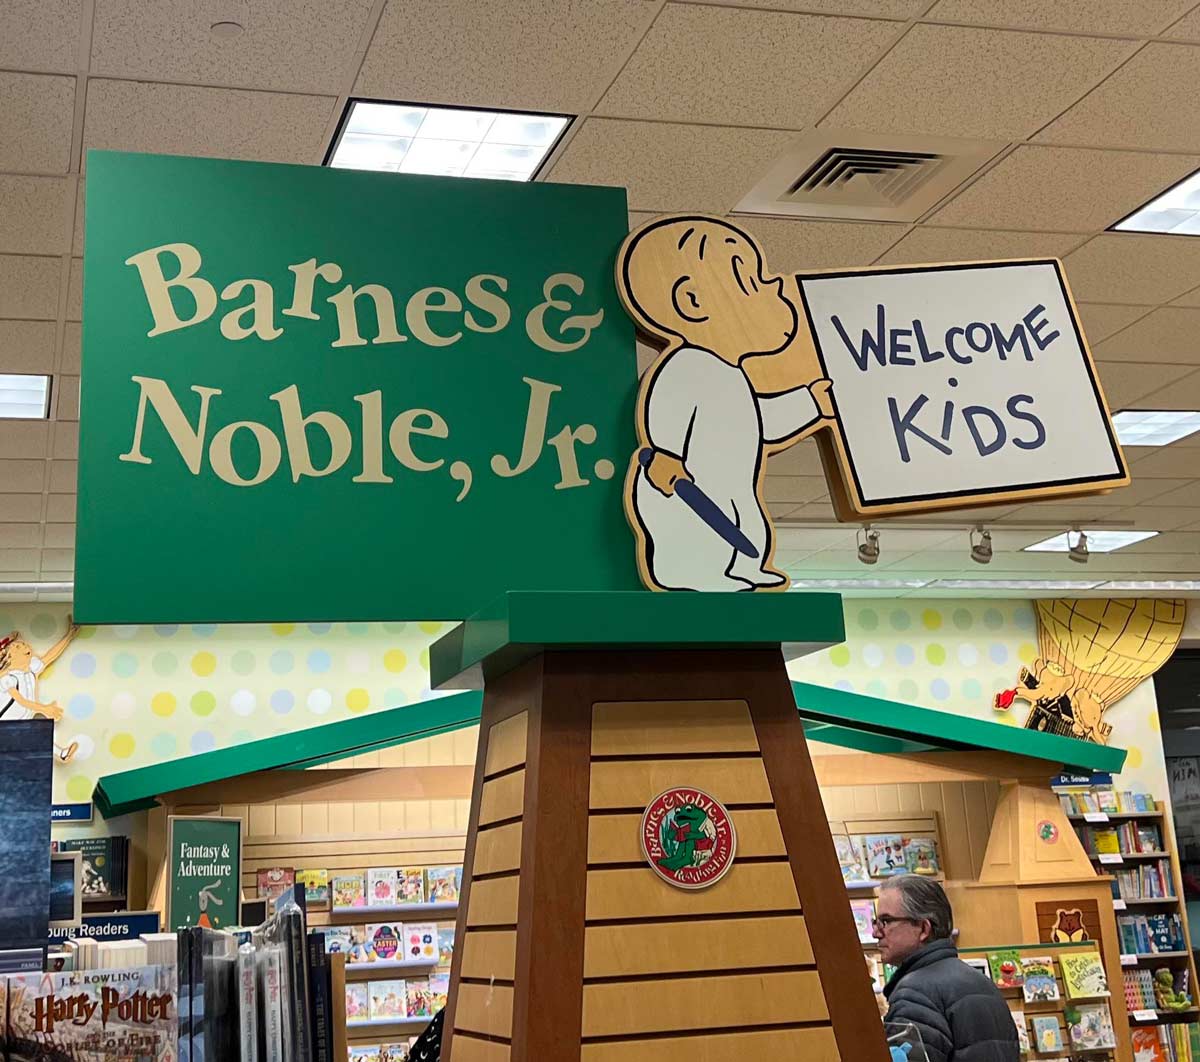 Just came to barns and noble with my son, he asked me why is the baby holding a knife